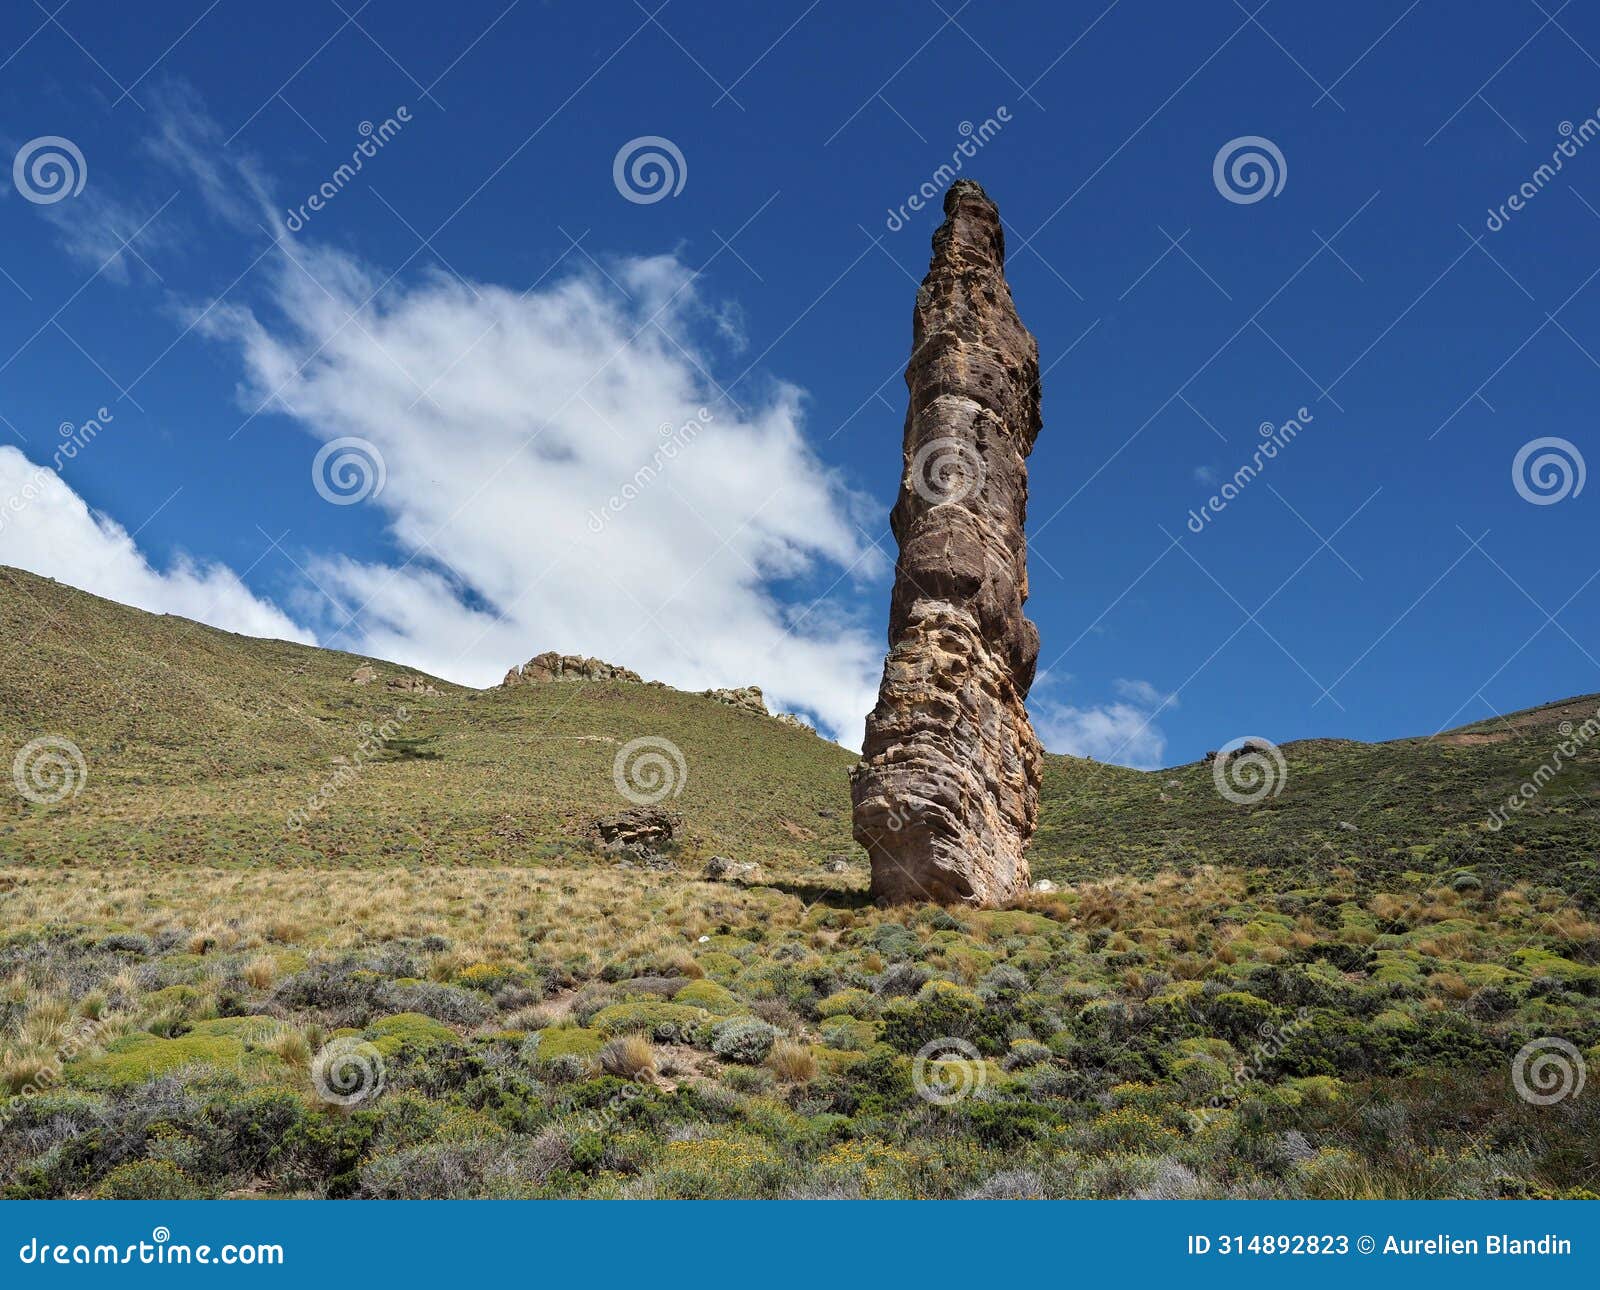 piedra clavada or nailed stone. a strange rock formation in patagonia, southern chile.